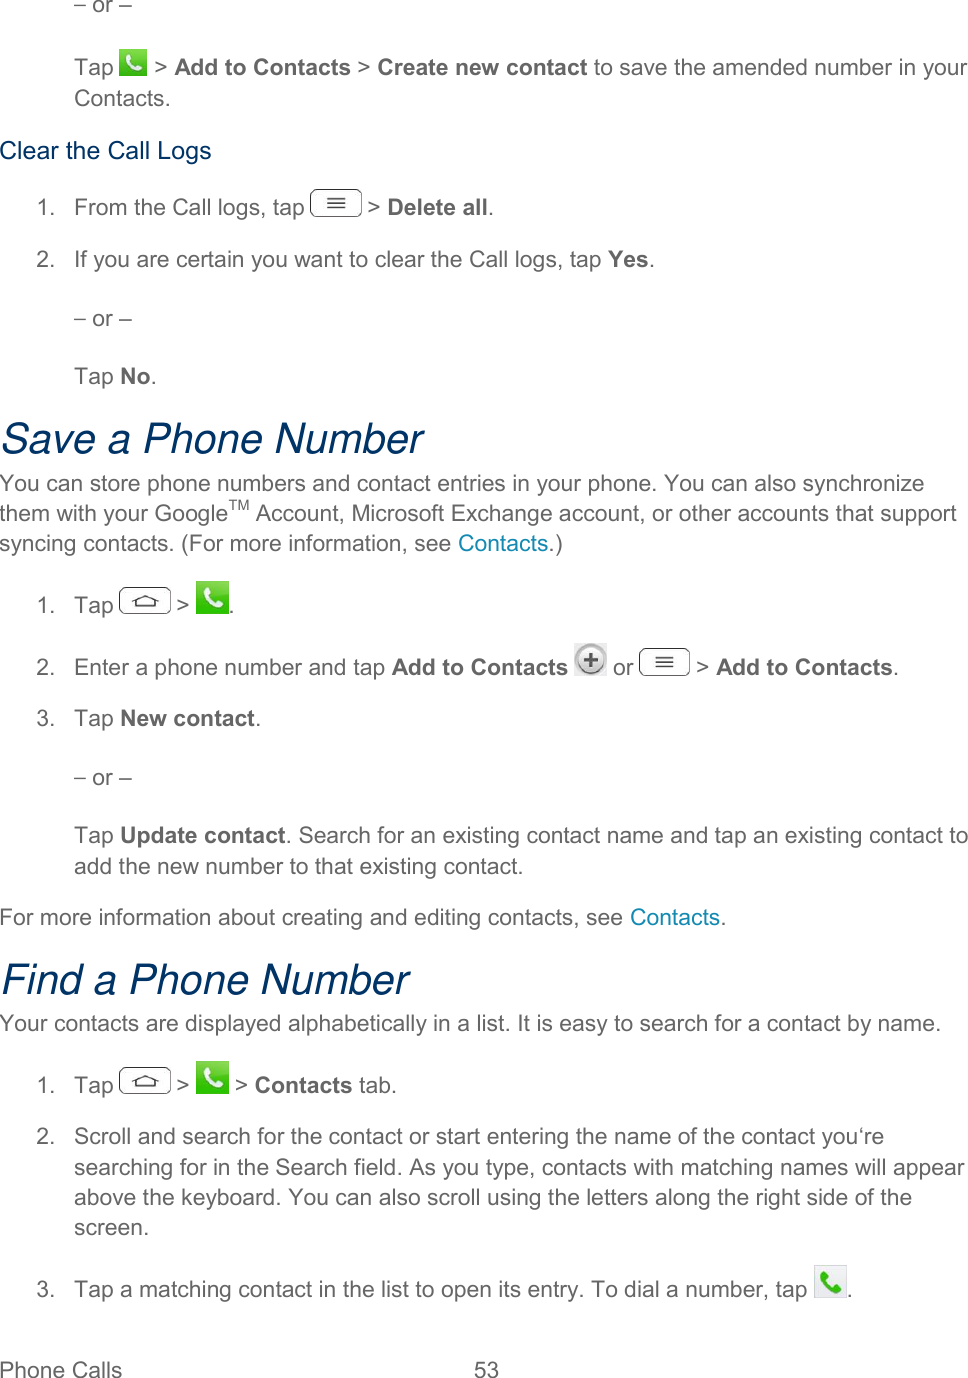  Phone Calls  53   – or – Tap   &gt; Add to Contacts &gt; Create new contact to save the amended number in your Contacts. Clear the Call Logs 1.  From the Call logs, tap   &gt; Delete all. 2.  If you are certain you want to clear the Call logs, tap Yes. – or – Tap No. Save a Phone Number You can store phone numbers and contact entries in your phone. You can also synchronize them with your GoogleTM Account, Microsoft Exchange account, or other accounts that support syncing contacts. (For more information, see Contacts.) 1.  Tap   &gt;  . 2.  Enter a phone number and tap Add to Contacts   or   &gt; Add to Contacts. 3.  Tap New contact. – or – Tap Update contact. Search for an existing contact name and tap an existing contact to add the new number to that existing contact. For more information about creating and editing contacts, see Contacts. Find a Phone Number Your contacts are displayed alphabetically in a list. It is easy to search for a contact by name. 1.  Tap   &gt;   &gt; Contacts tab. 2.  Scroll and search for the contact or start entering the name of the contact you‘re searching for in the Search field. As you type, contacts with matching names will appear above the keyboard. You can also scroll using the letters along the right side of the screen. 3.  Tap a matching contact in the list to open its entry. To dial a number, tap  . 